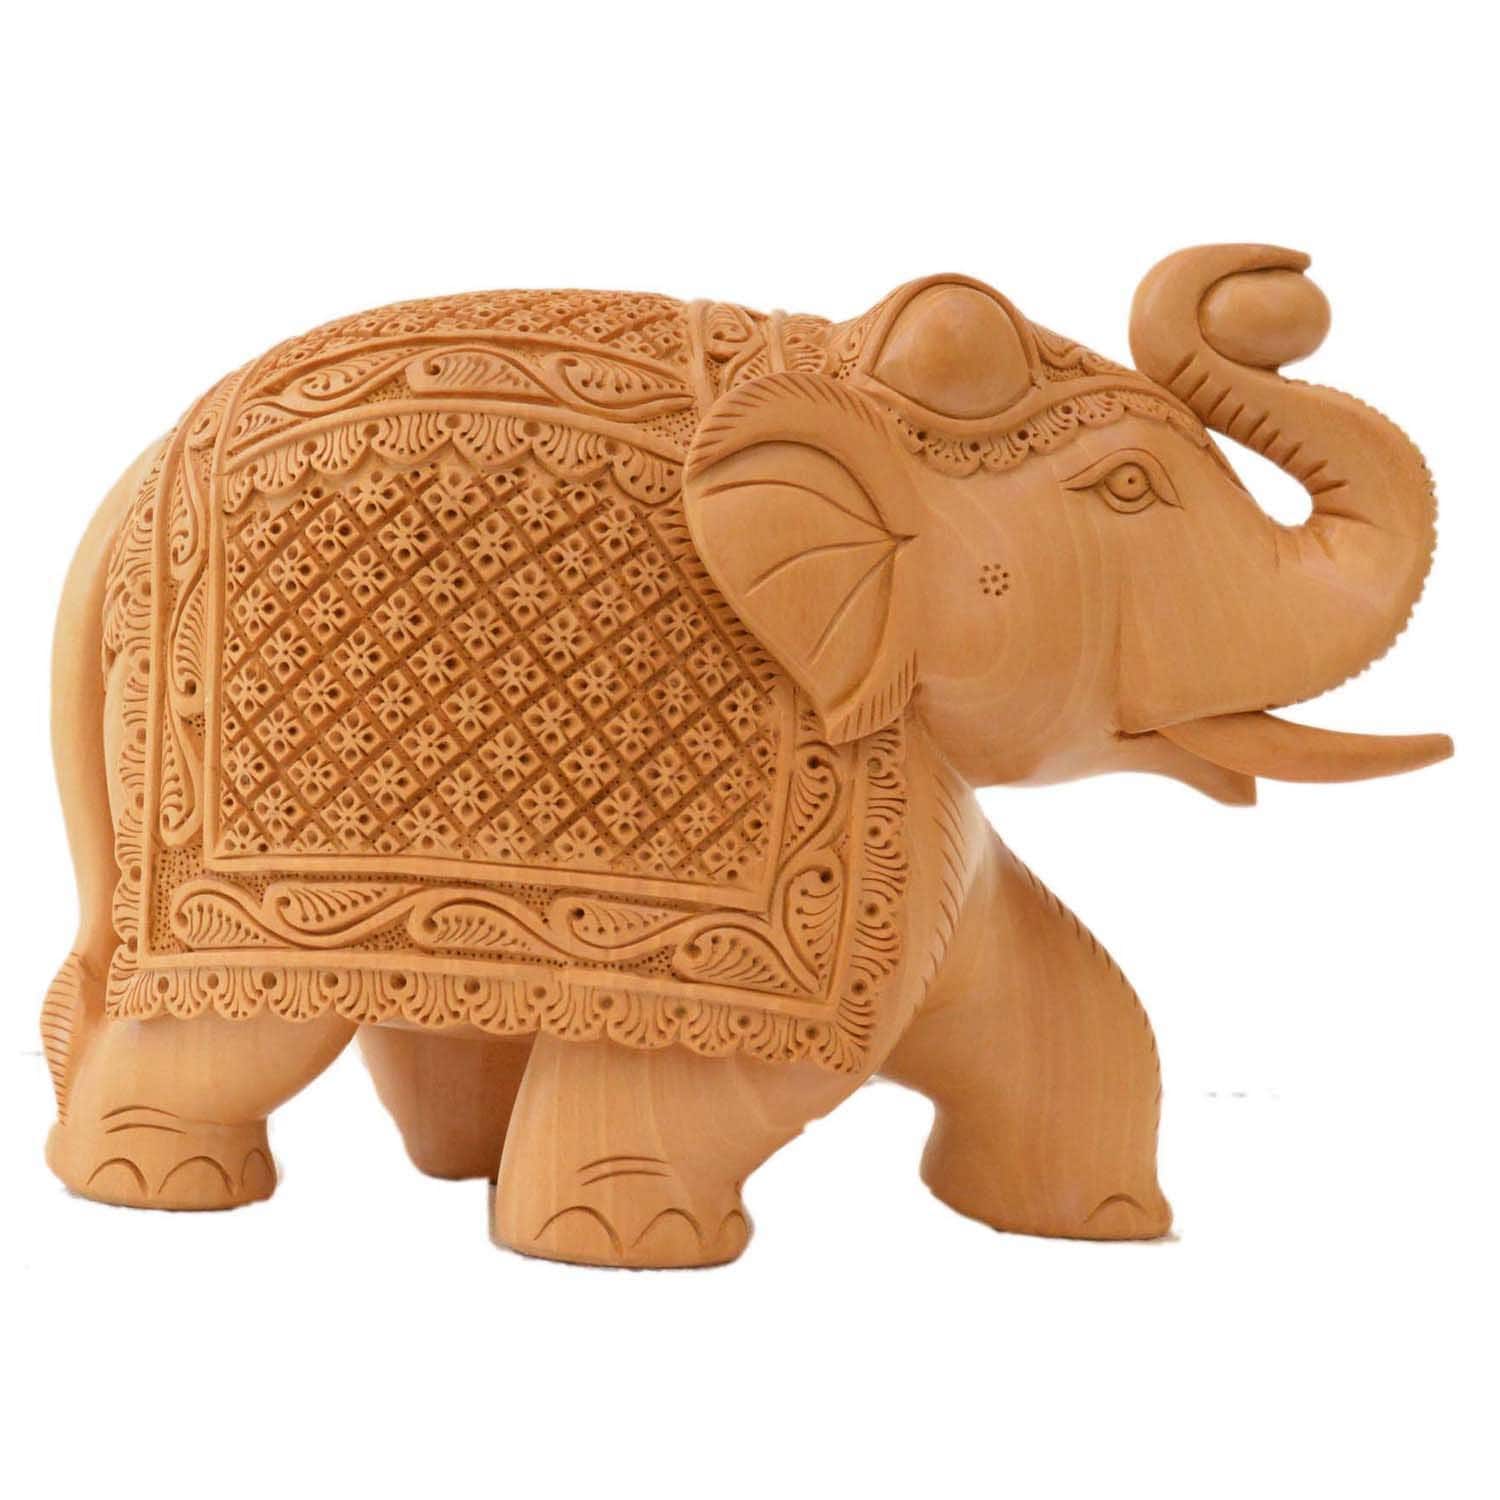 Wooden elephant statue Hand carving handicrafts artifacts home decor collectibles gifts Indian art